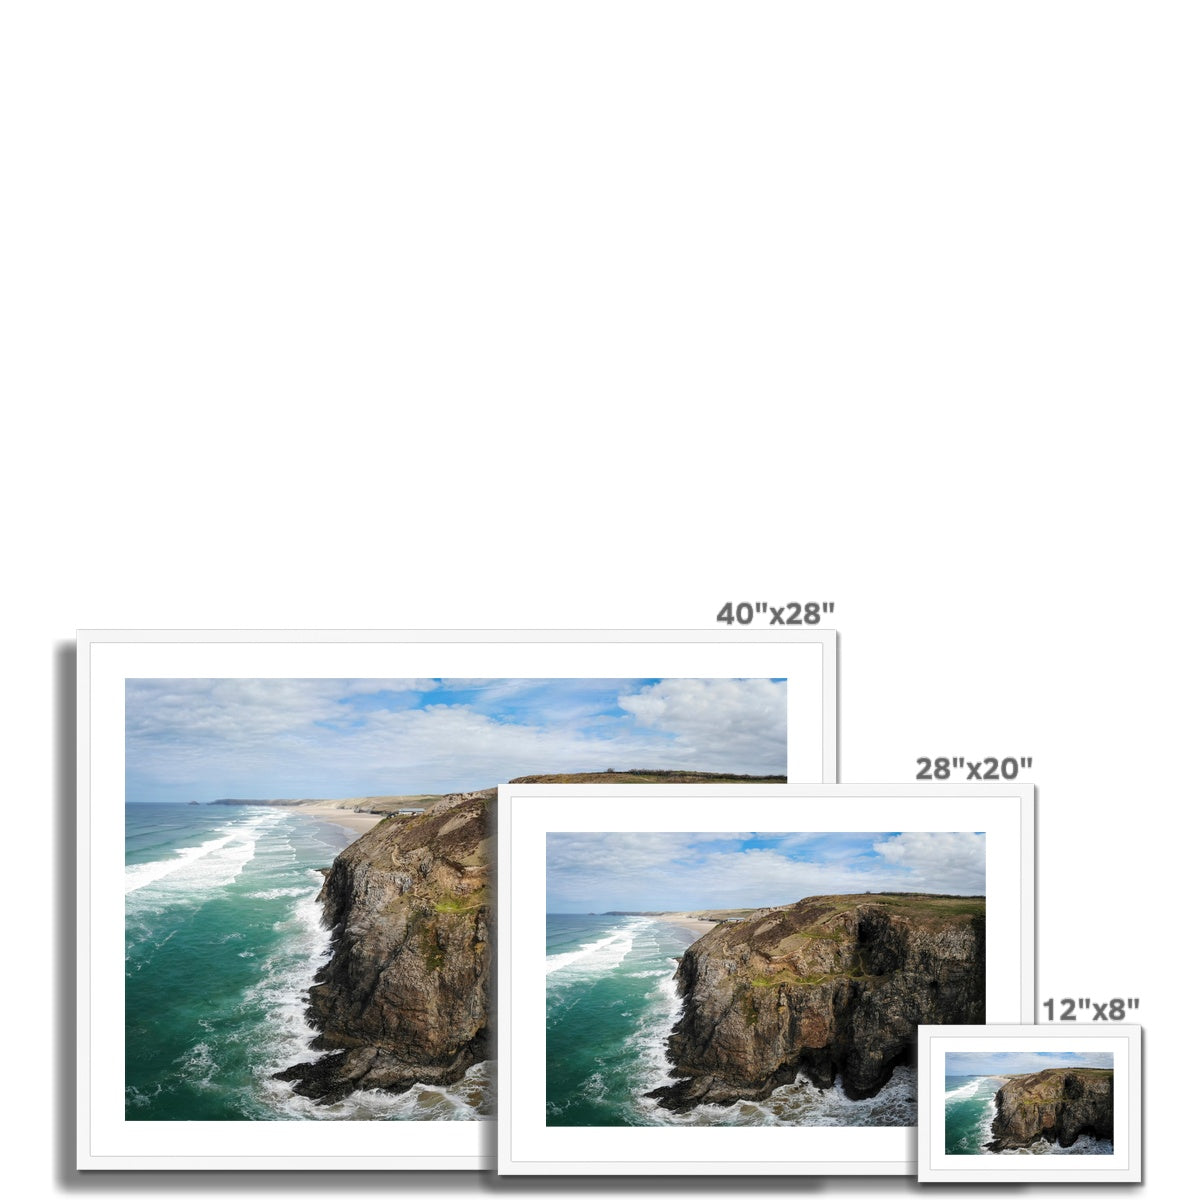 droskyn caves wooden frame sizes